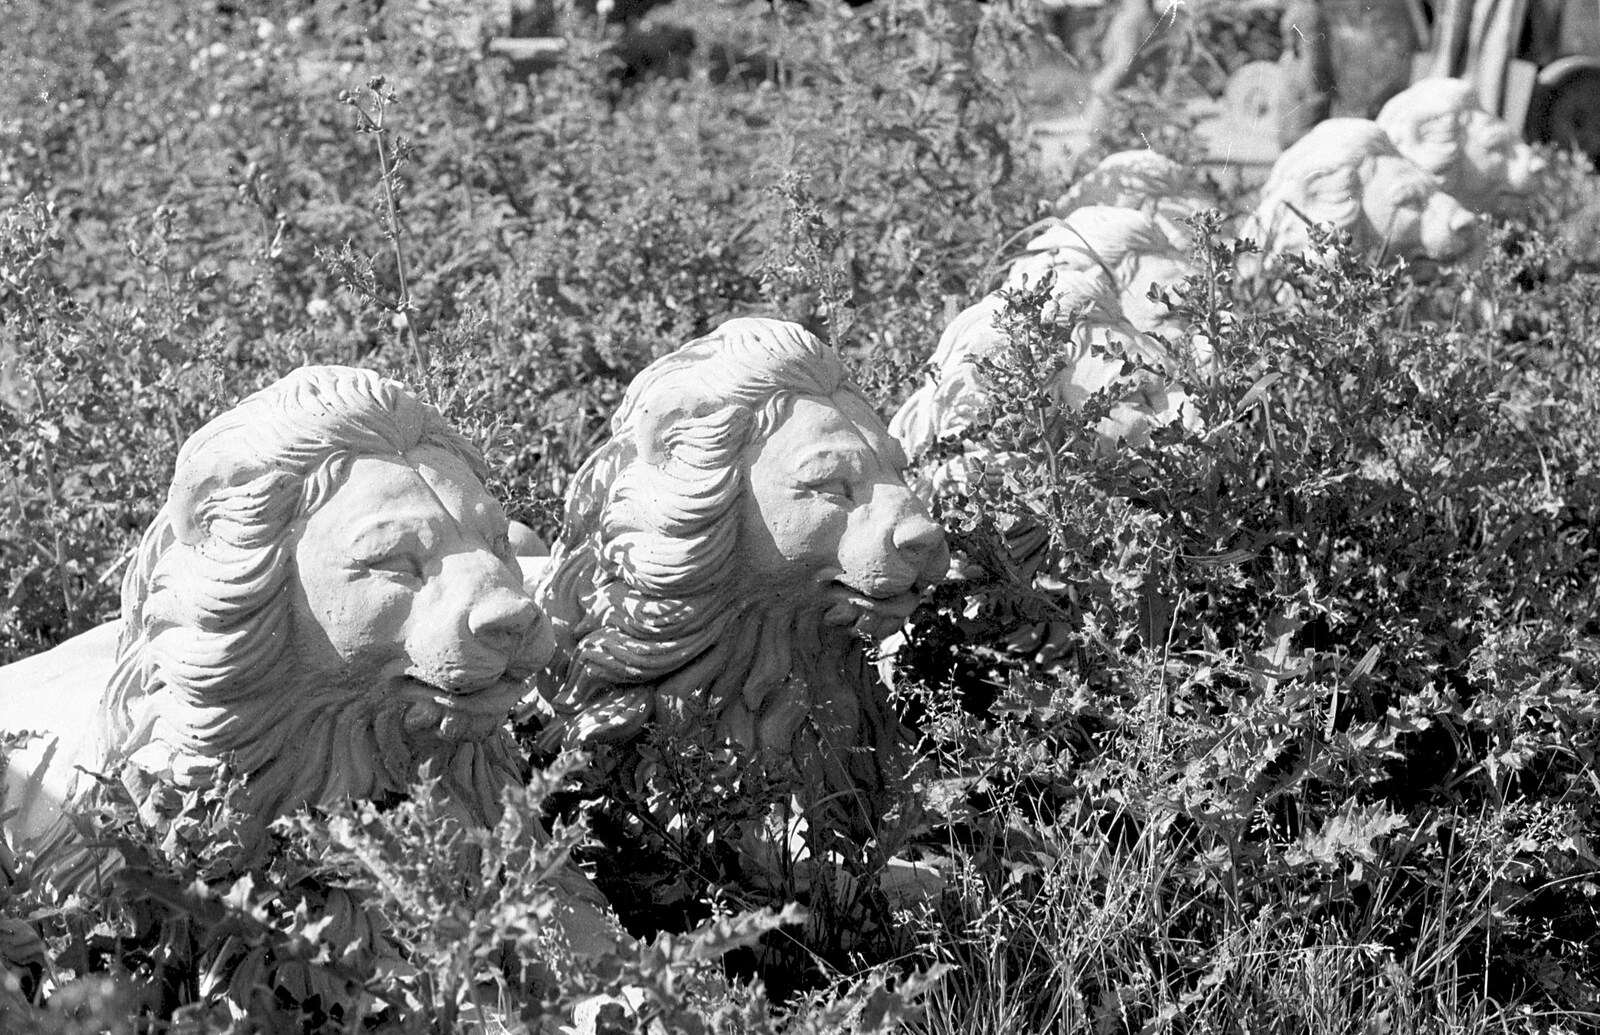 A Black and White Life in Concrete, Stuston, Suffolk - 3rd September 1992: Some lions in the undergrowth